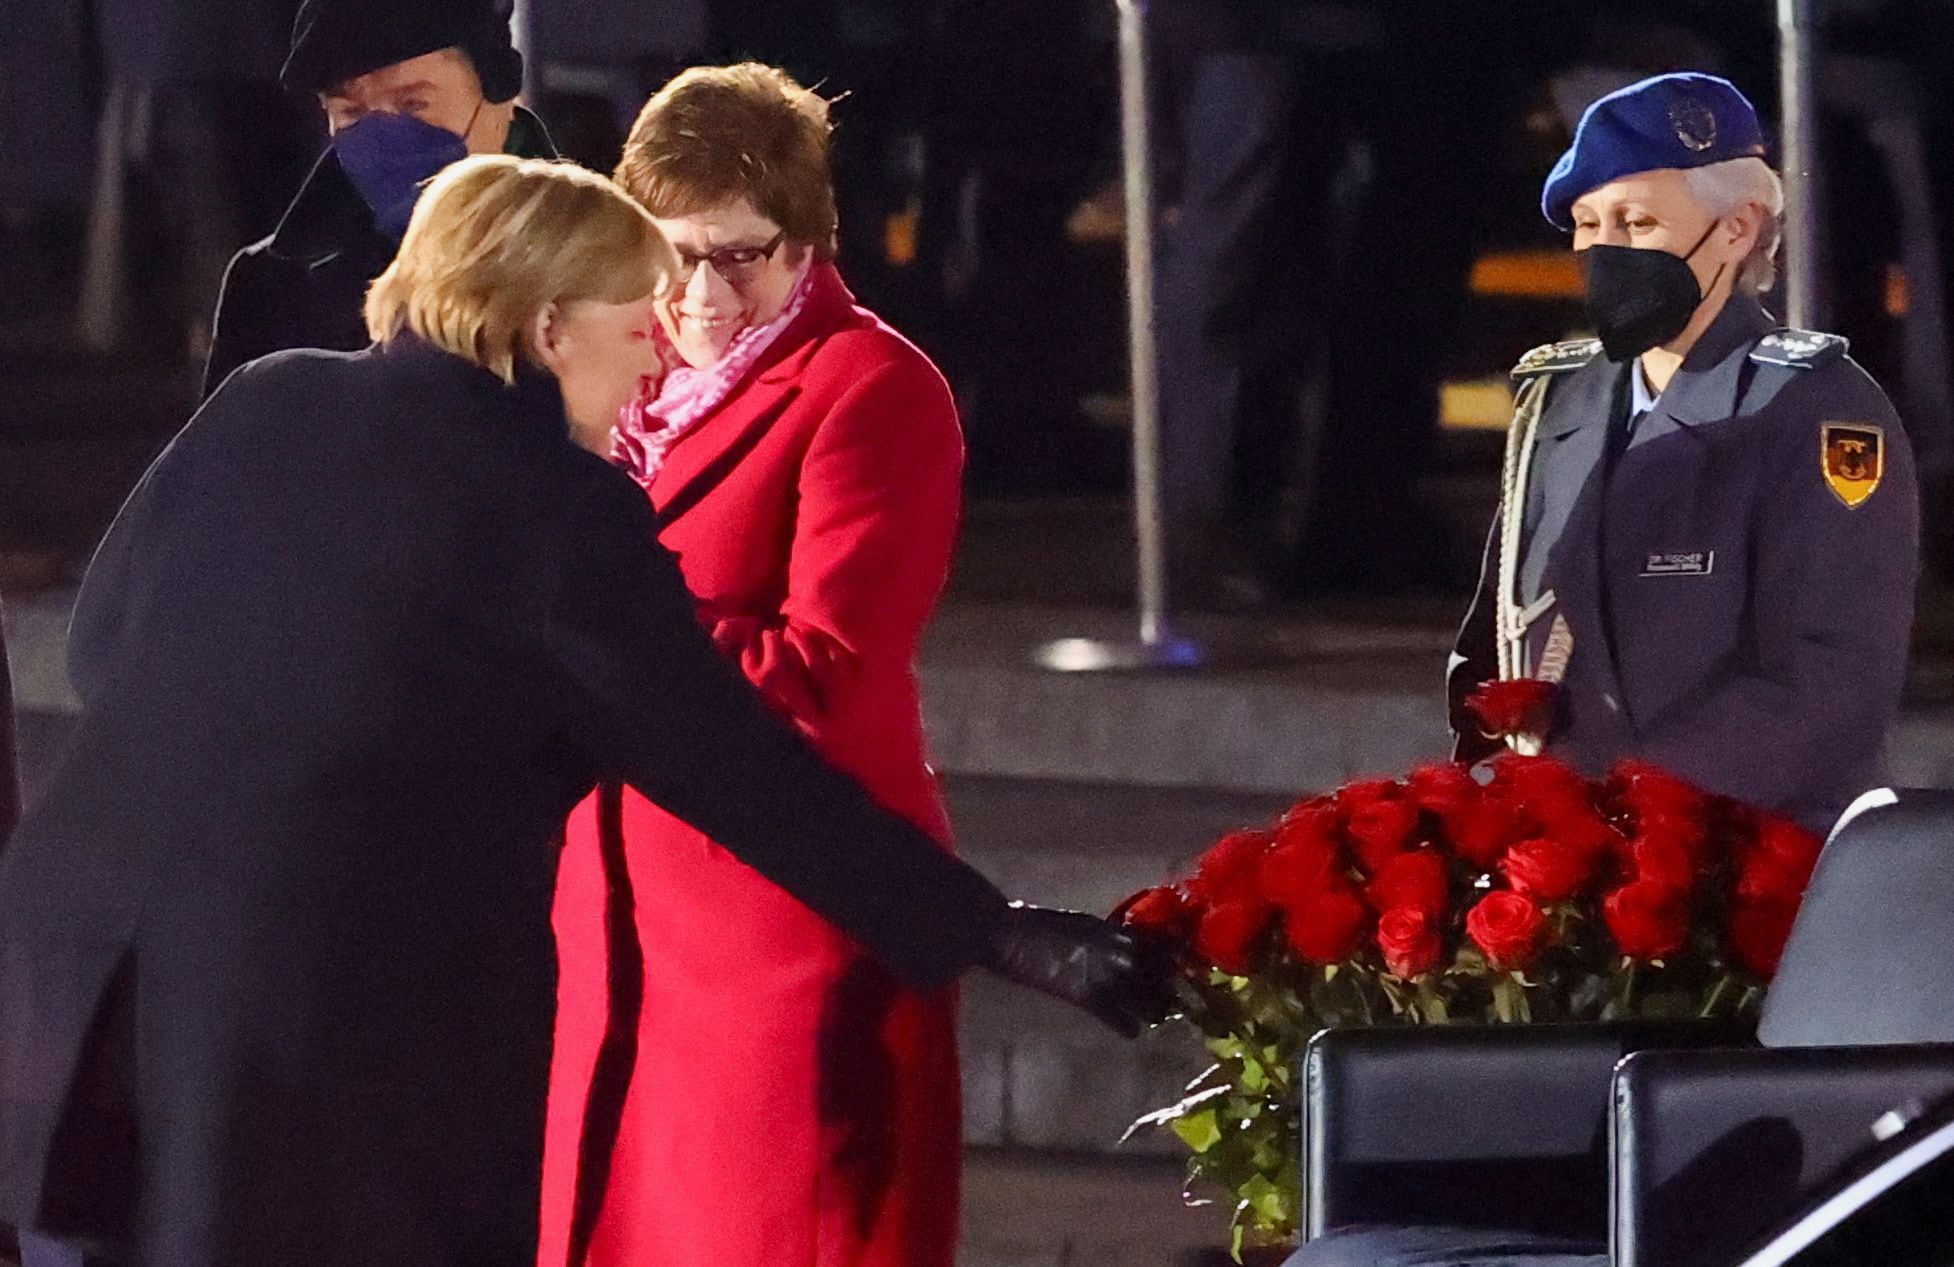 Red roses were another topic of the ceremony in Berlin (REUTERS / Fabrizio Bensch)